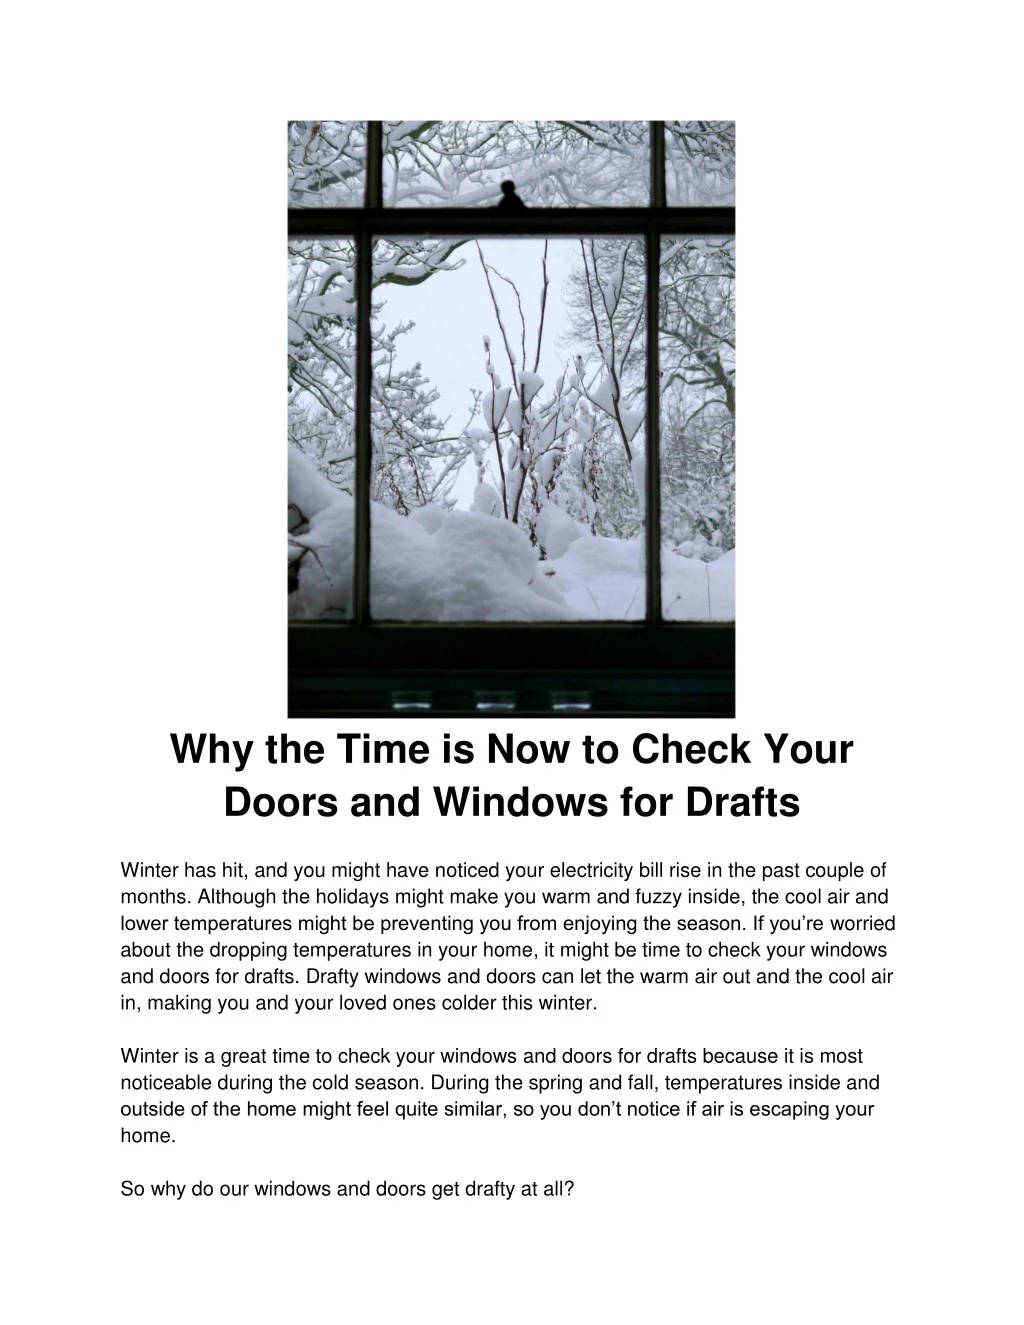 why the time is now to check your doors